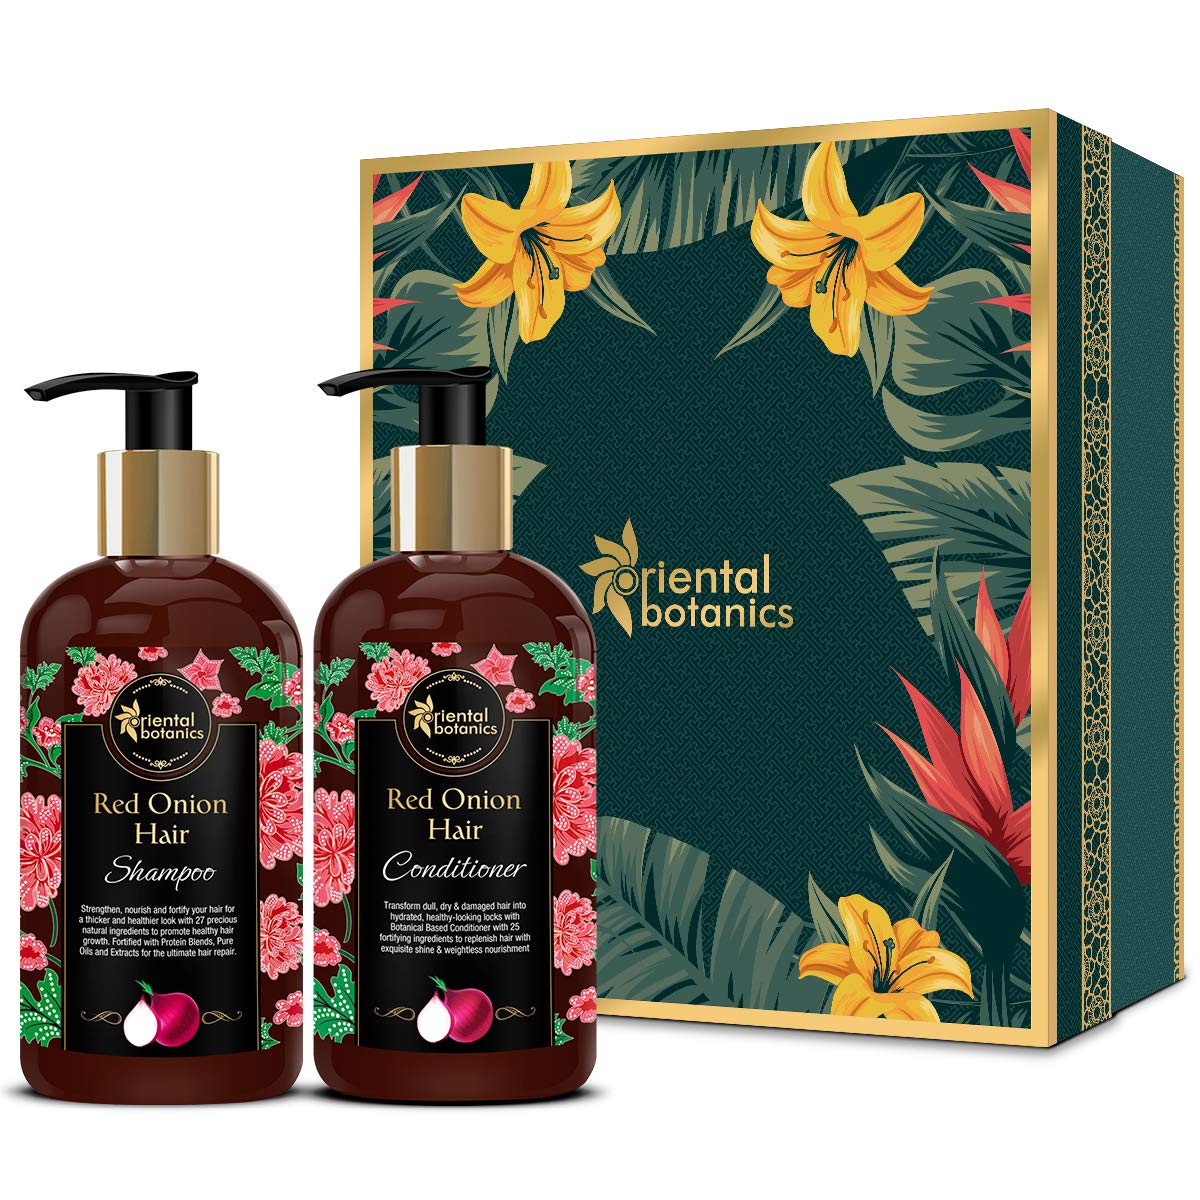 Oriental Botanics Red Onion Hair Shampoo + Red Onion Oil Conditioner Kit with 25 Natural Ingredients (Shampoo + Conditioner, 300ml Each)